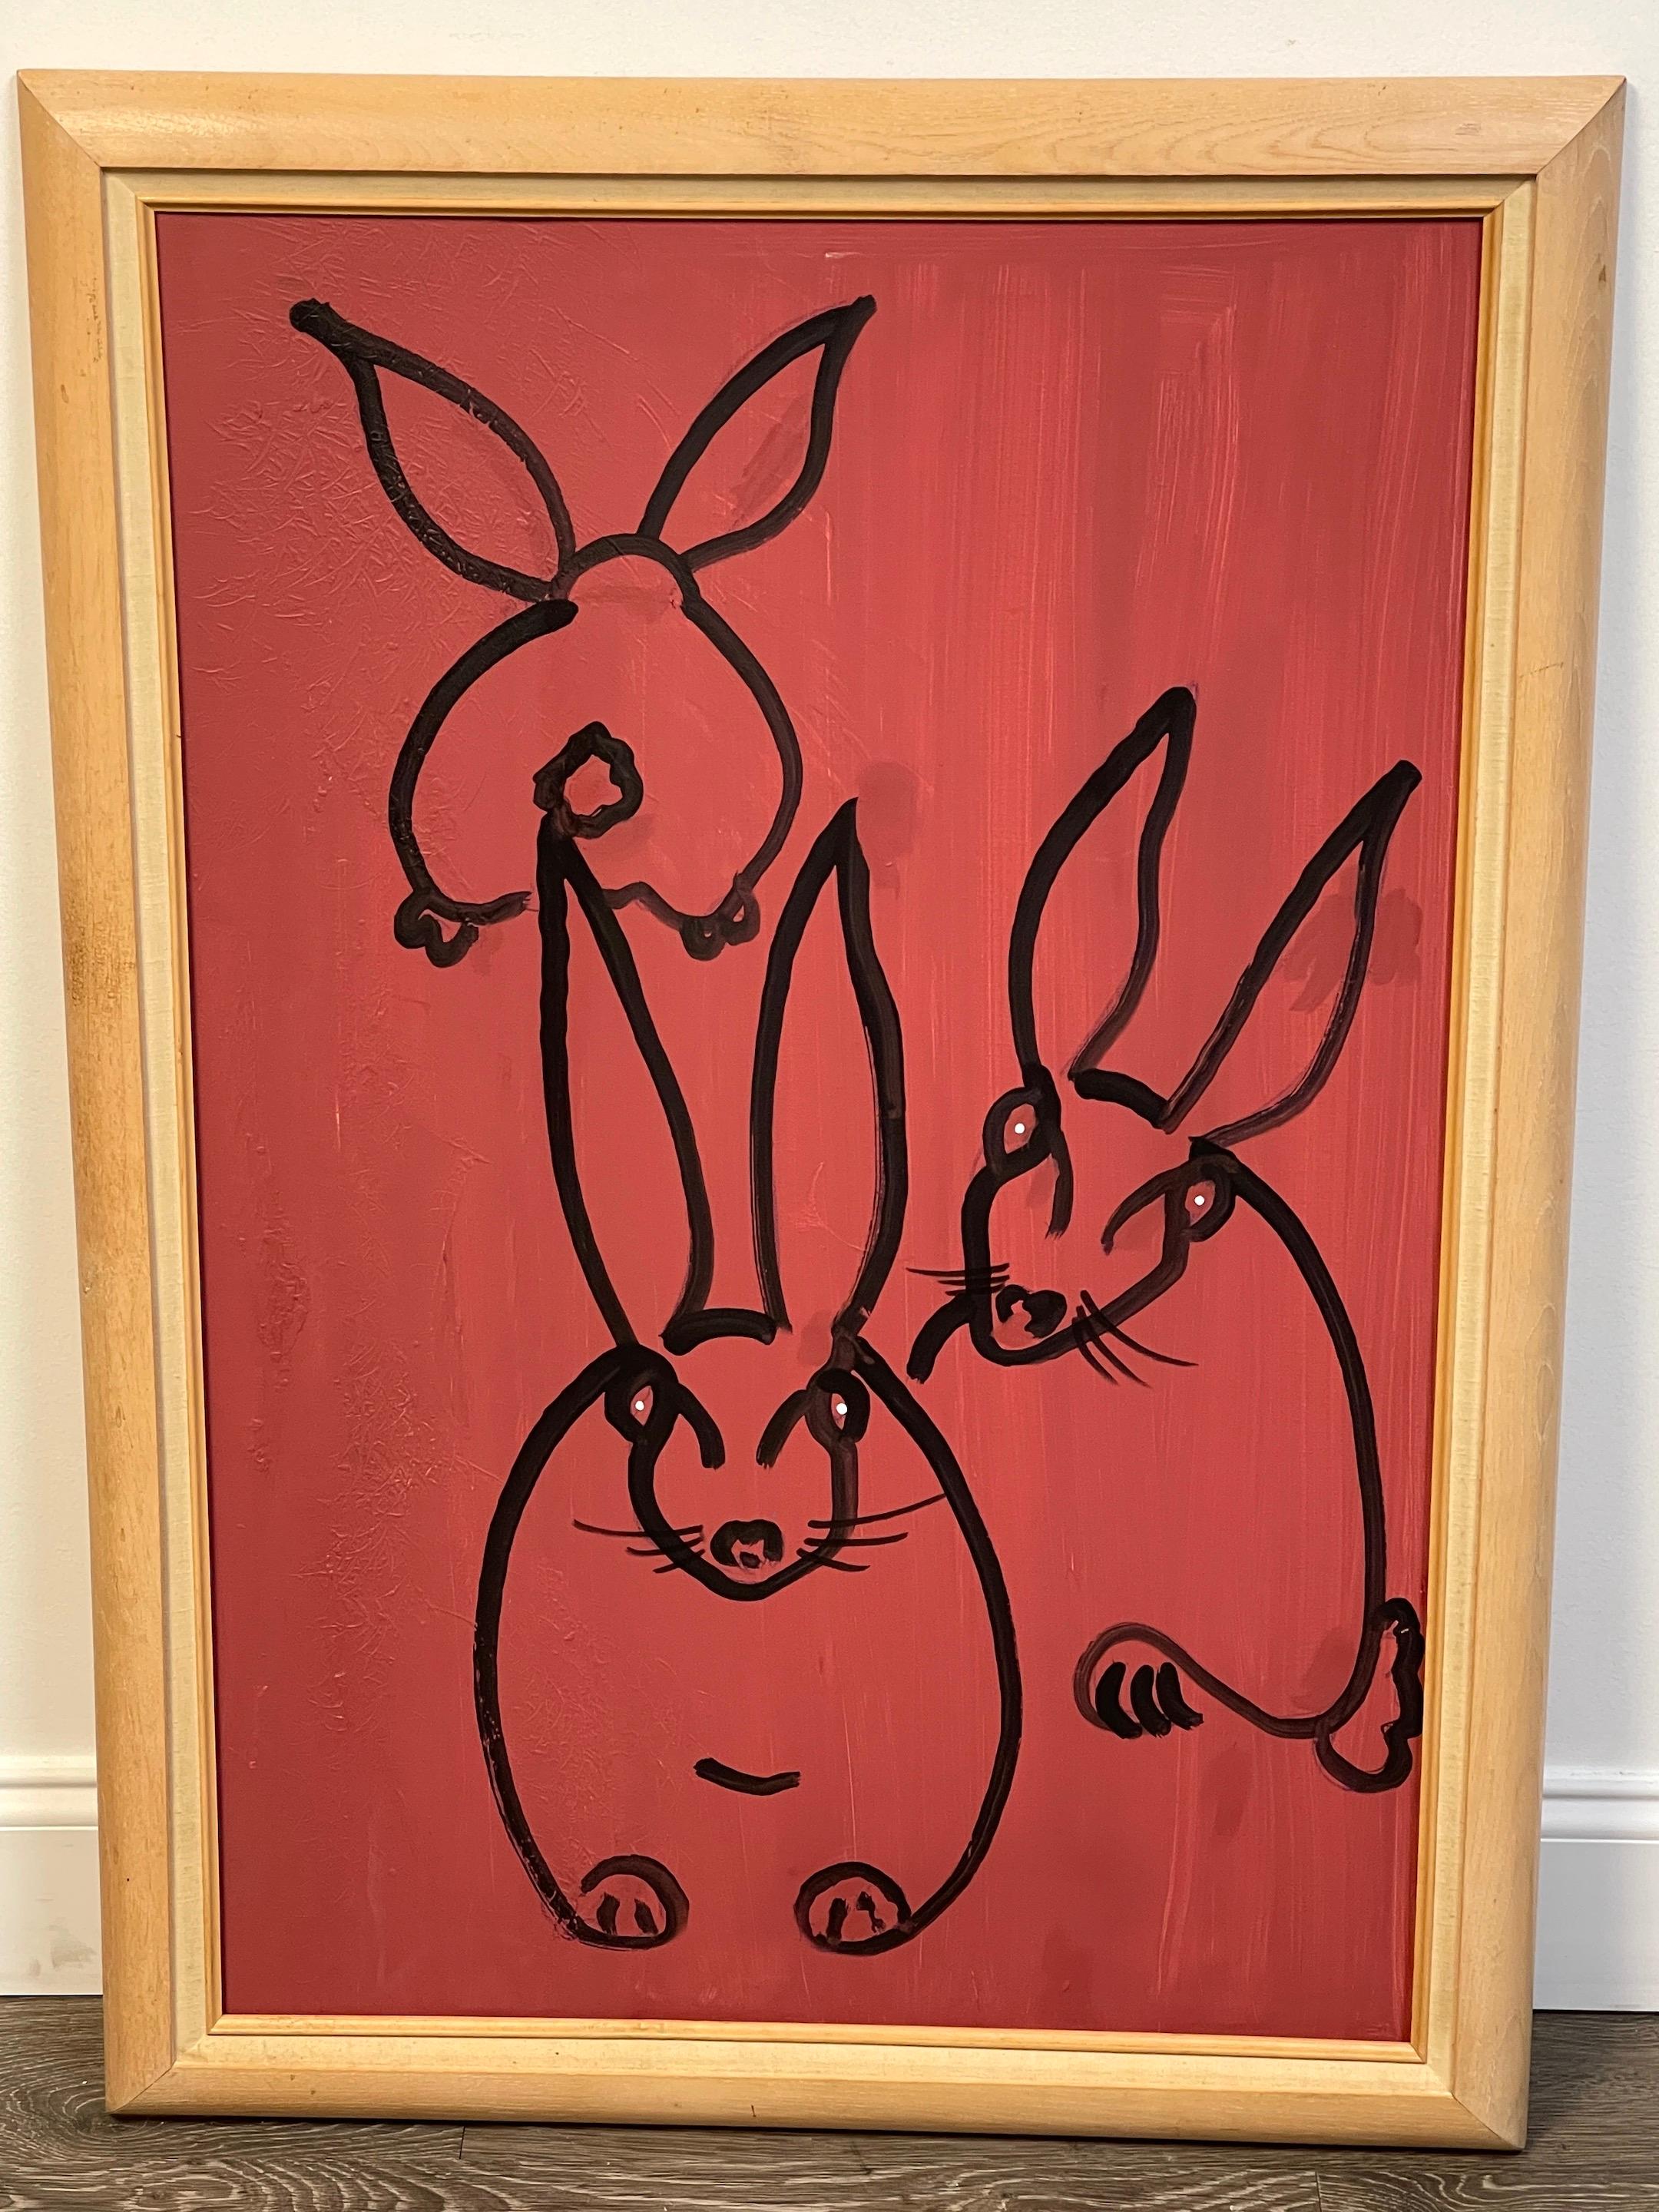 Modern Portrait of Three Rabbits, in the style of Hunt Slonem
USA, 20th century
Oil on canvas 
A whimsical portrait study of three seated rabbits in fuchsia background. 
This work is unsigned 
Measures: Canvas 36-inches high x 24-inches wide